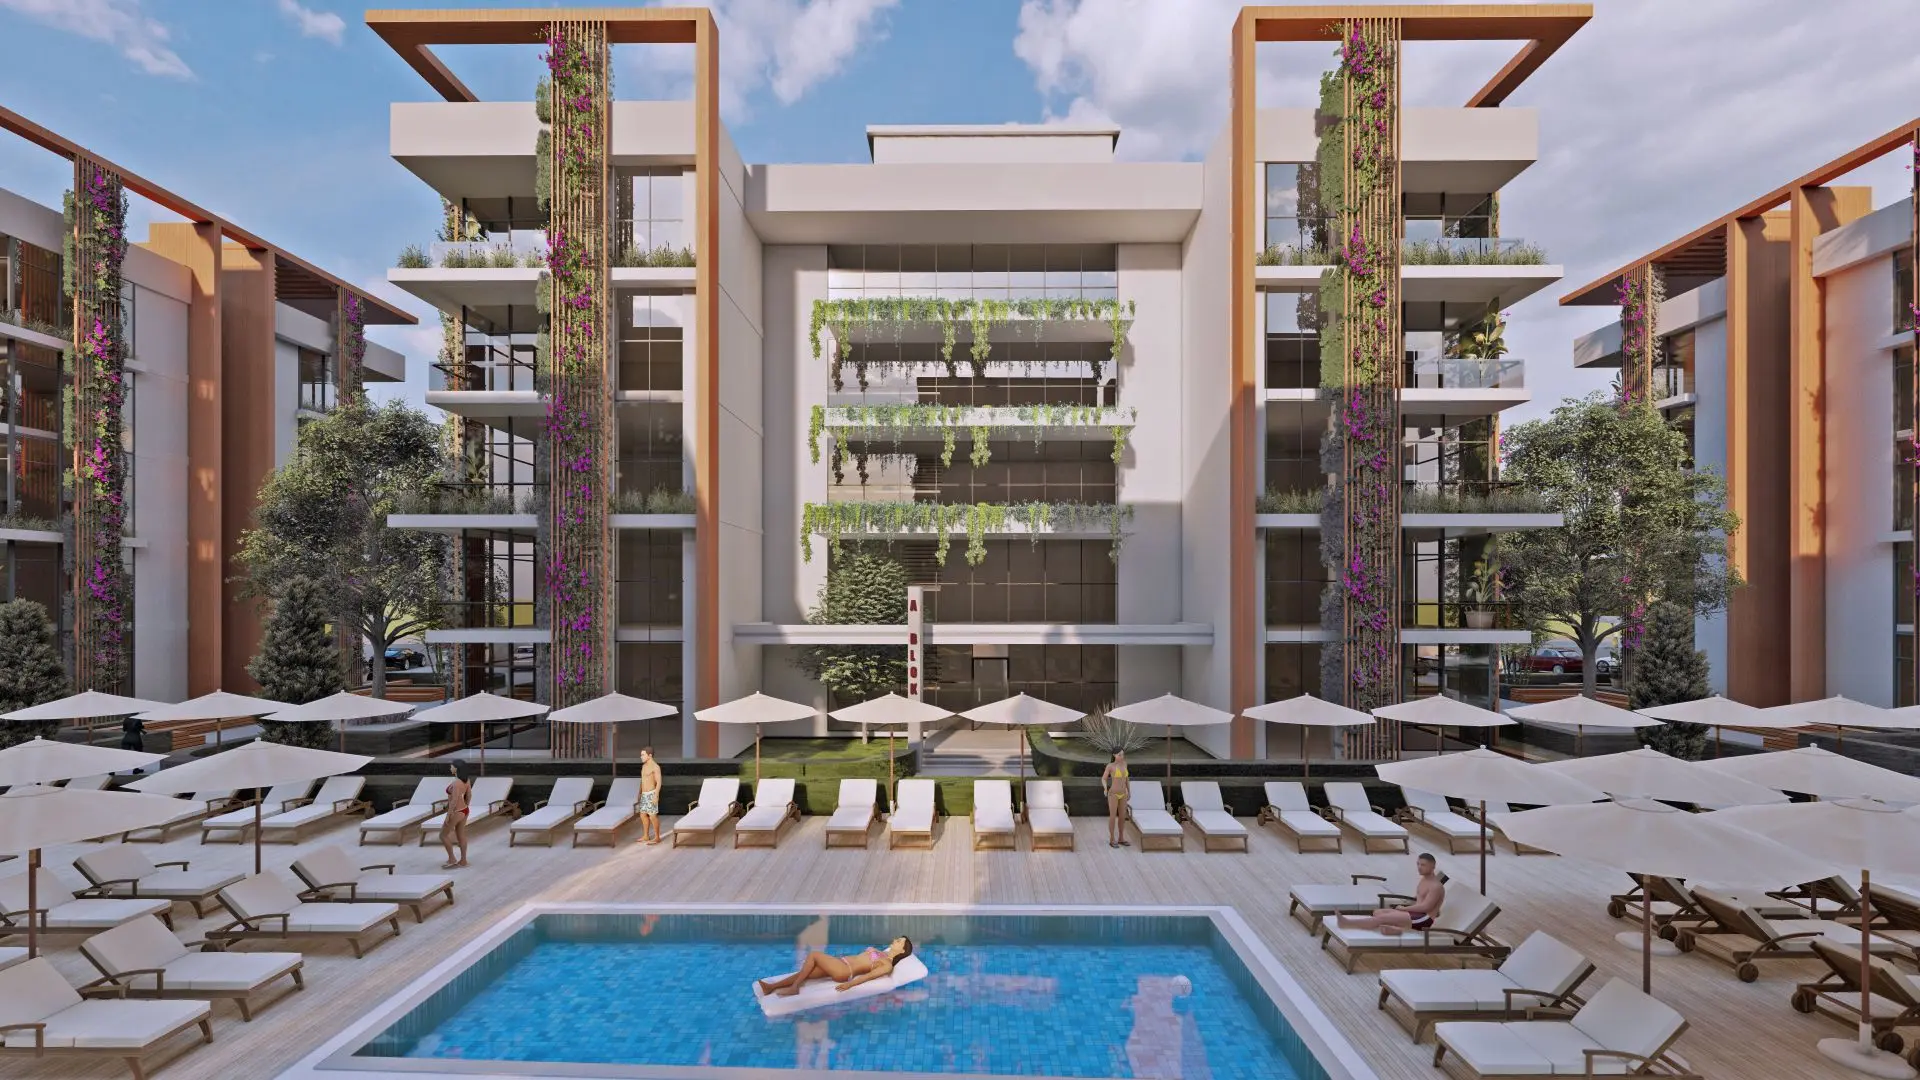 LARGE COMPLEX PROJECT CLOSE TO THE AIRPORT IN ANTALYA